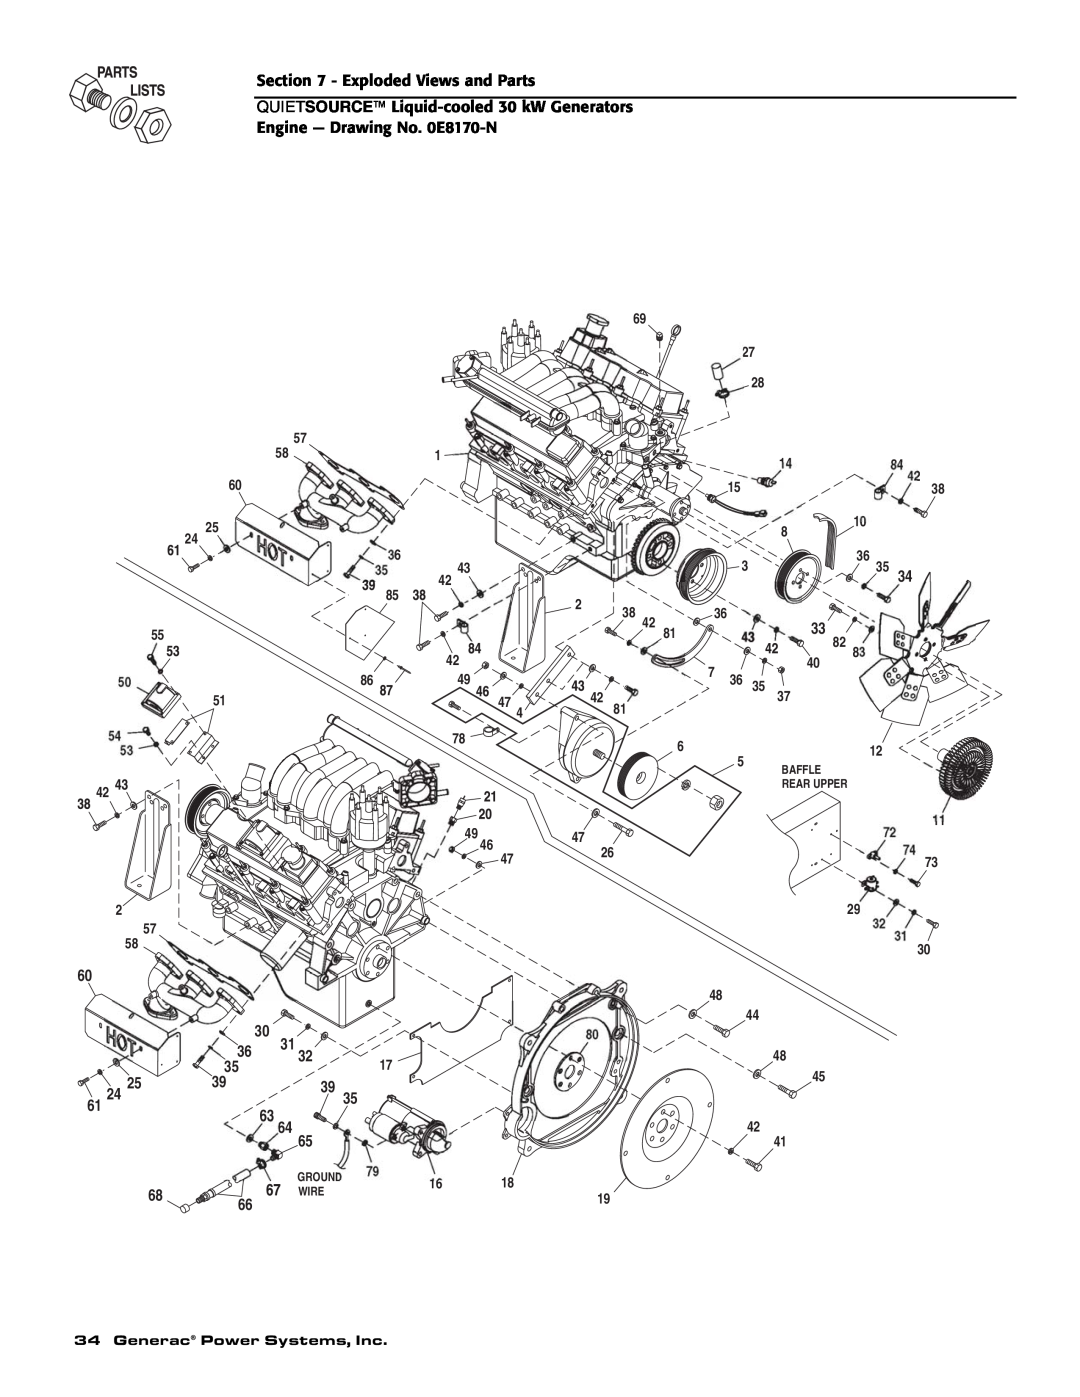 Generac Power Systems 004917-3 owner manual Exploded Views and Parts, Generac Power Systems, Inc 